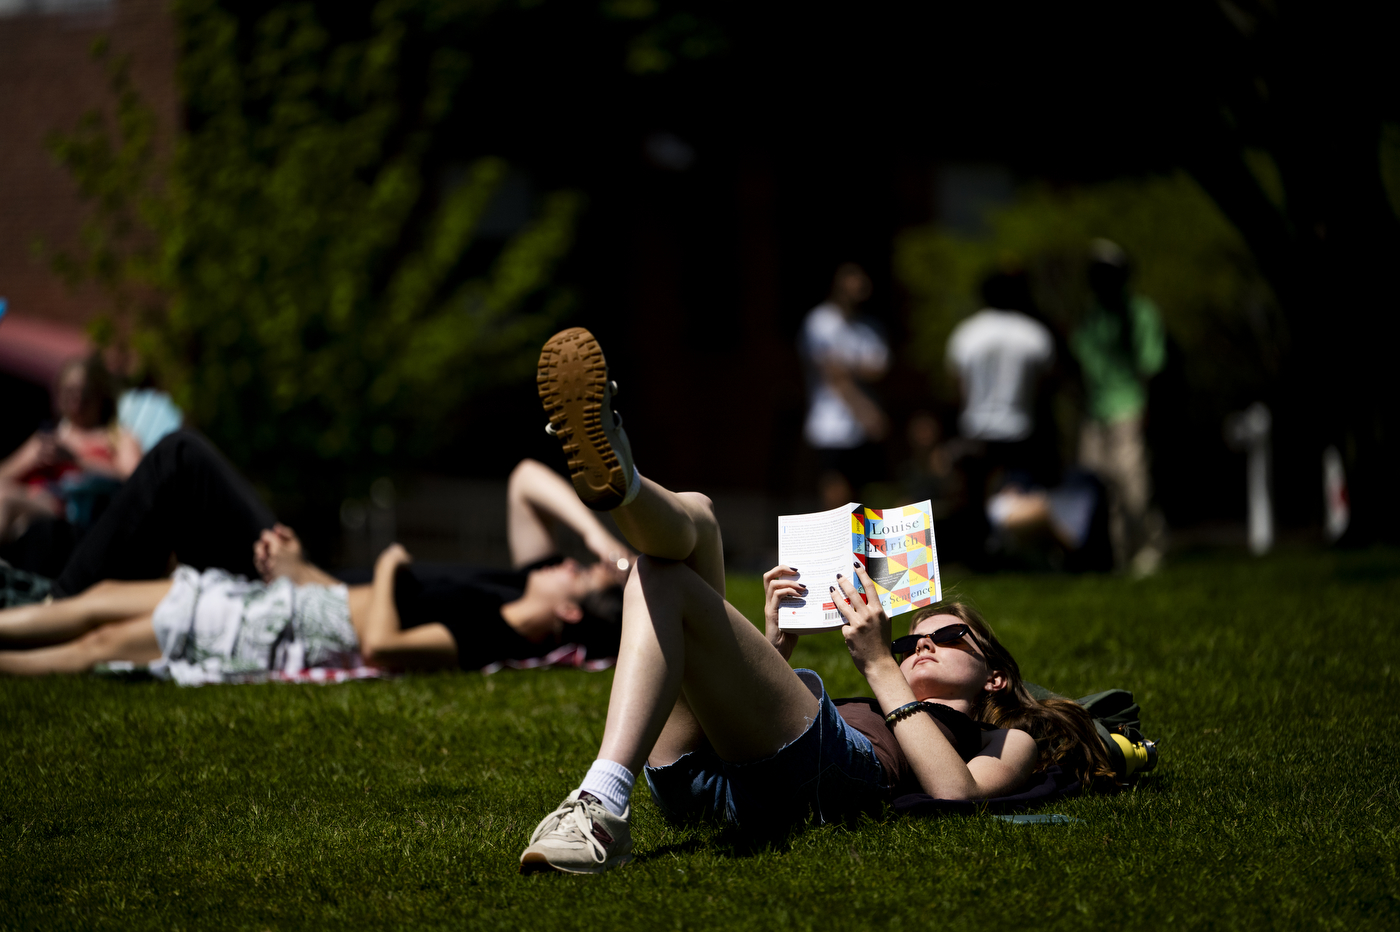 A person reads a book while lying in the grass outside on a sunny day.